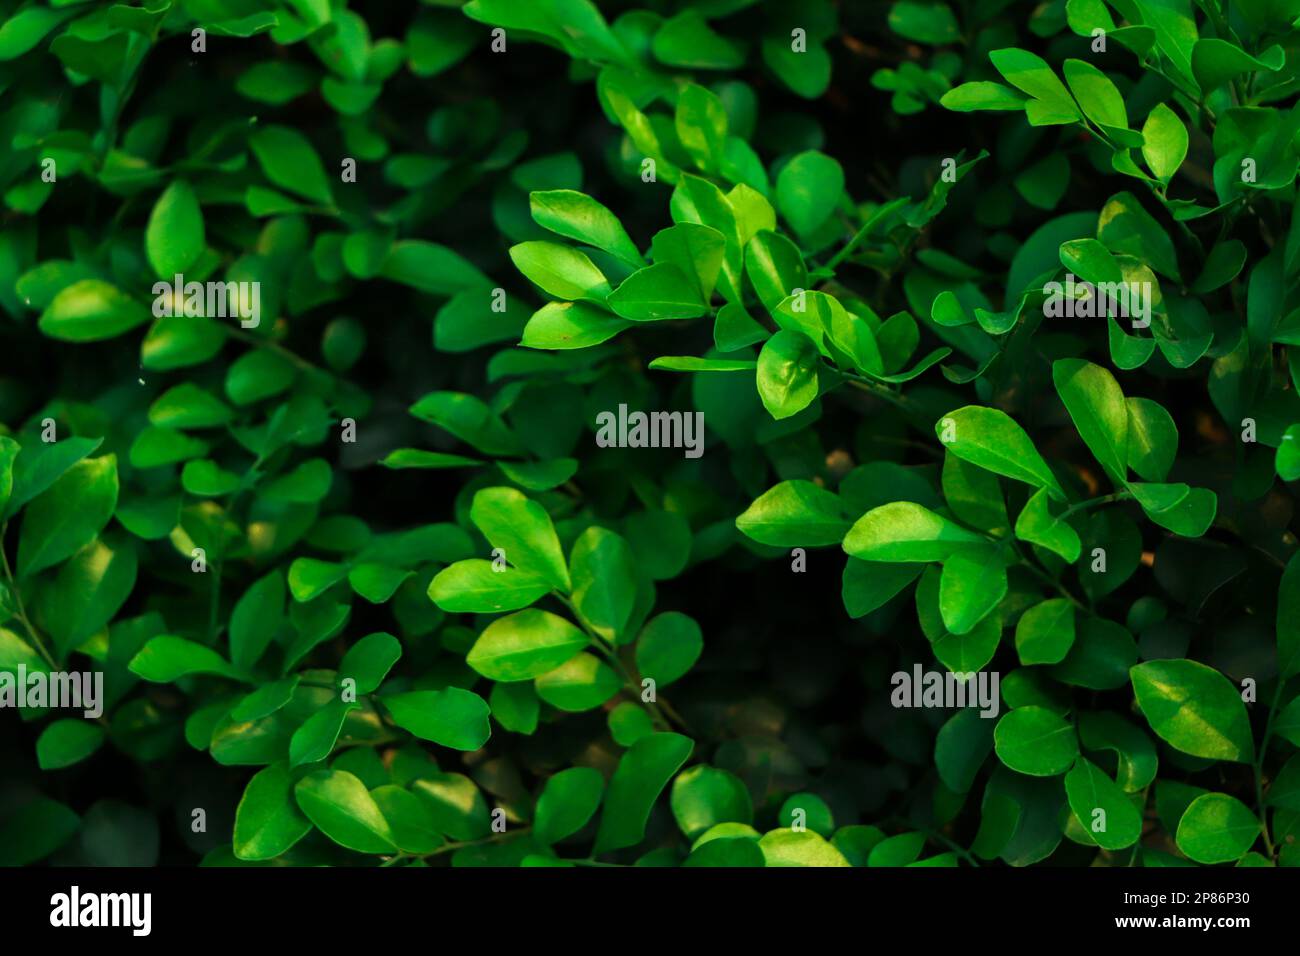 Forest background of green leaf with dark green tone Stock Photo